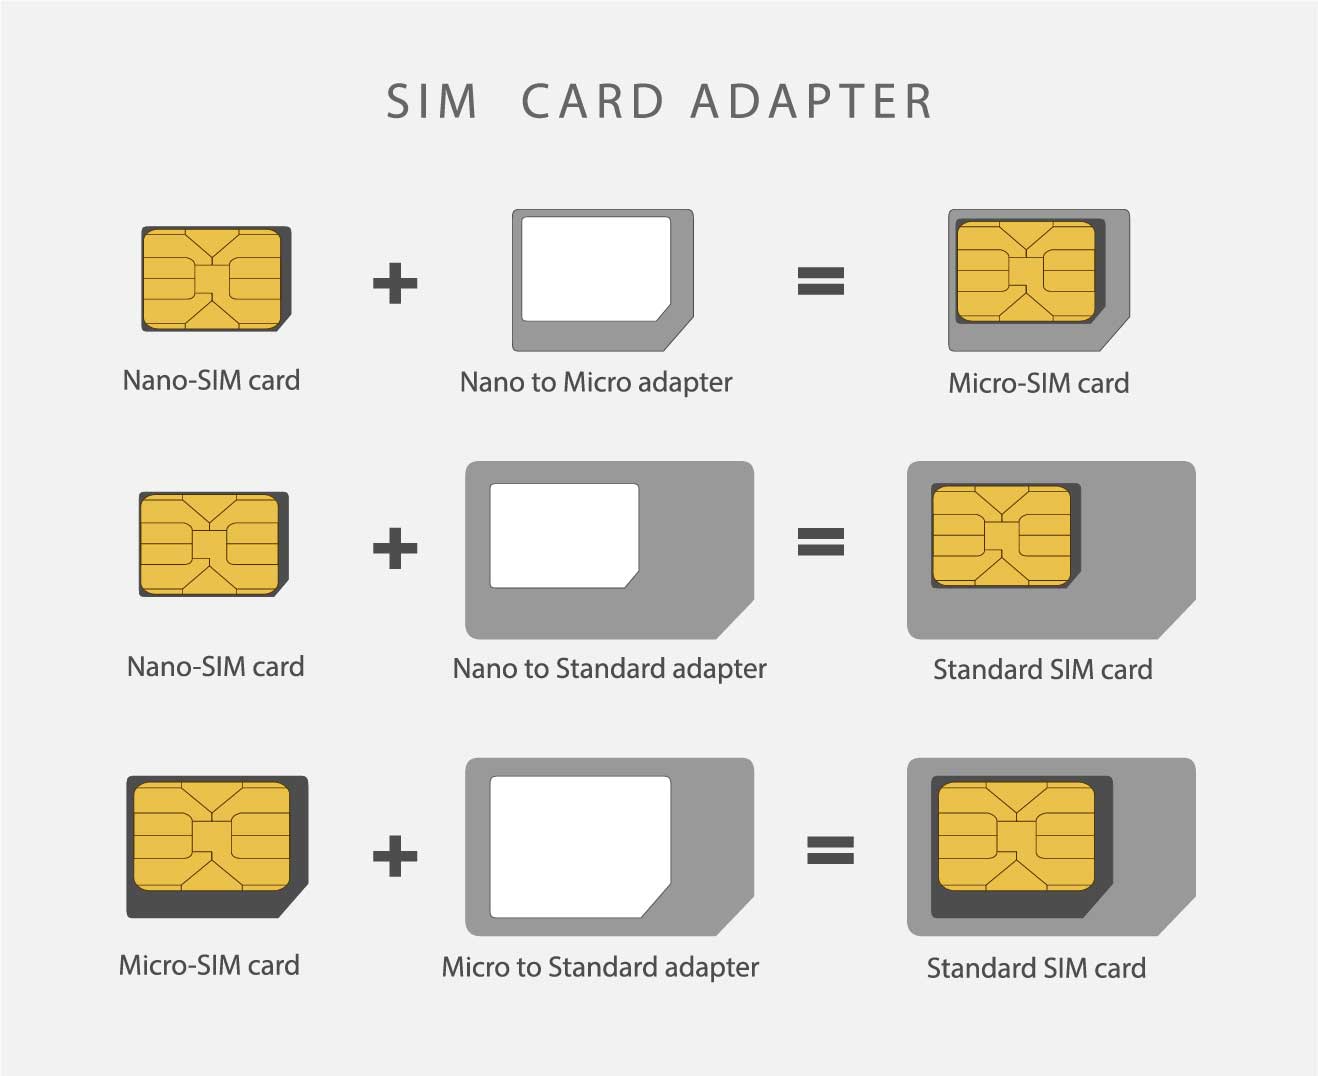 Different SIM card adapters